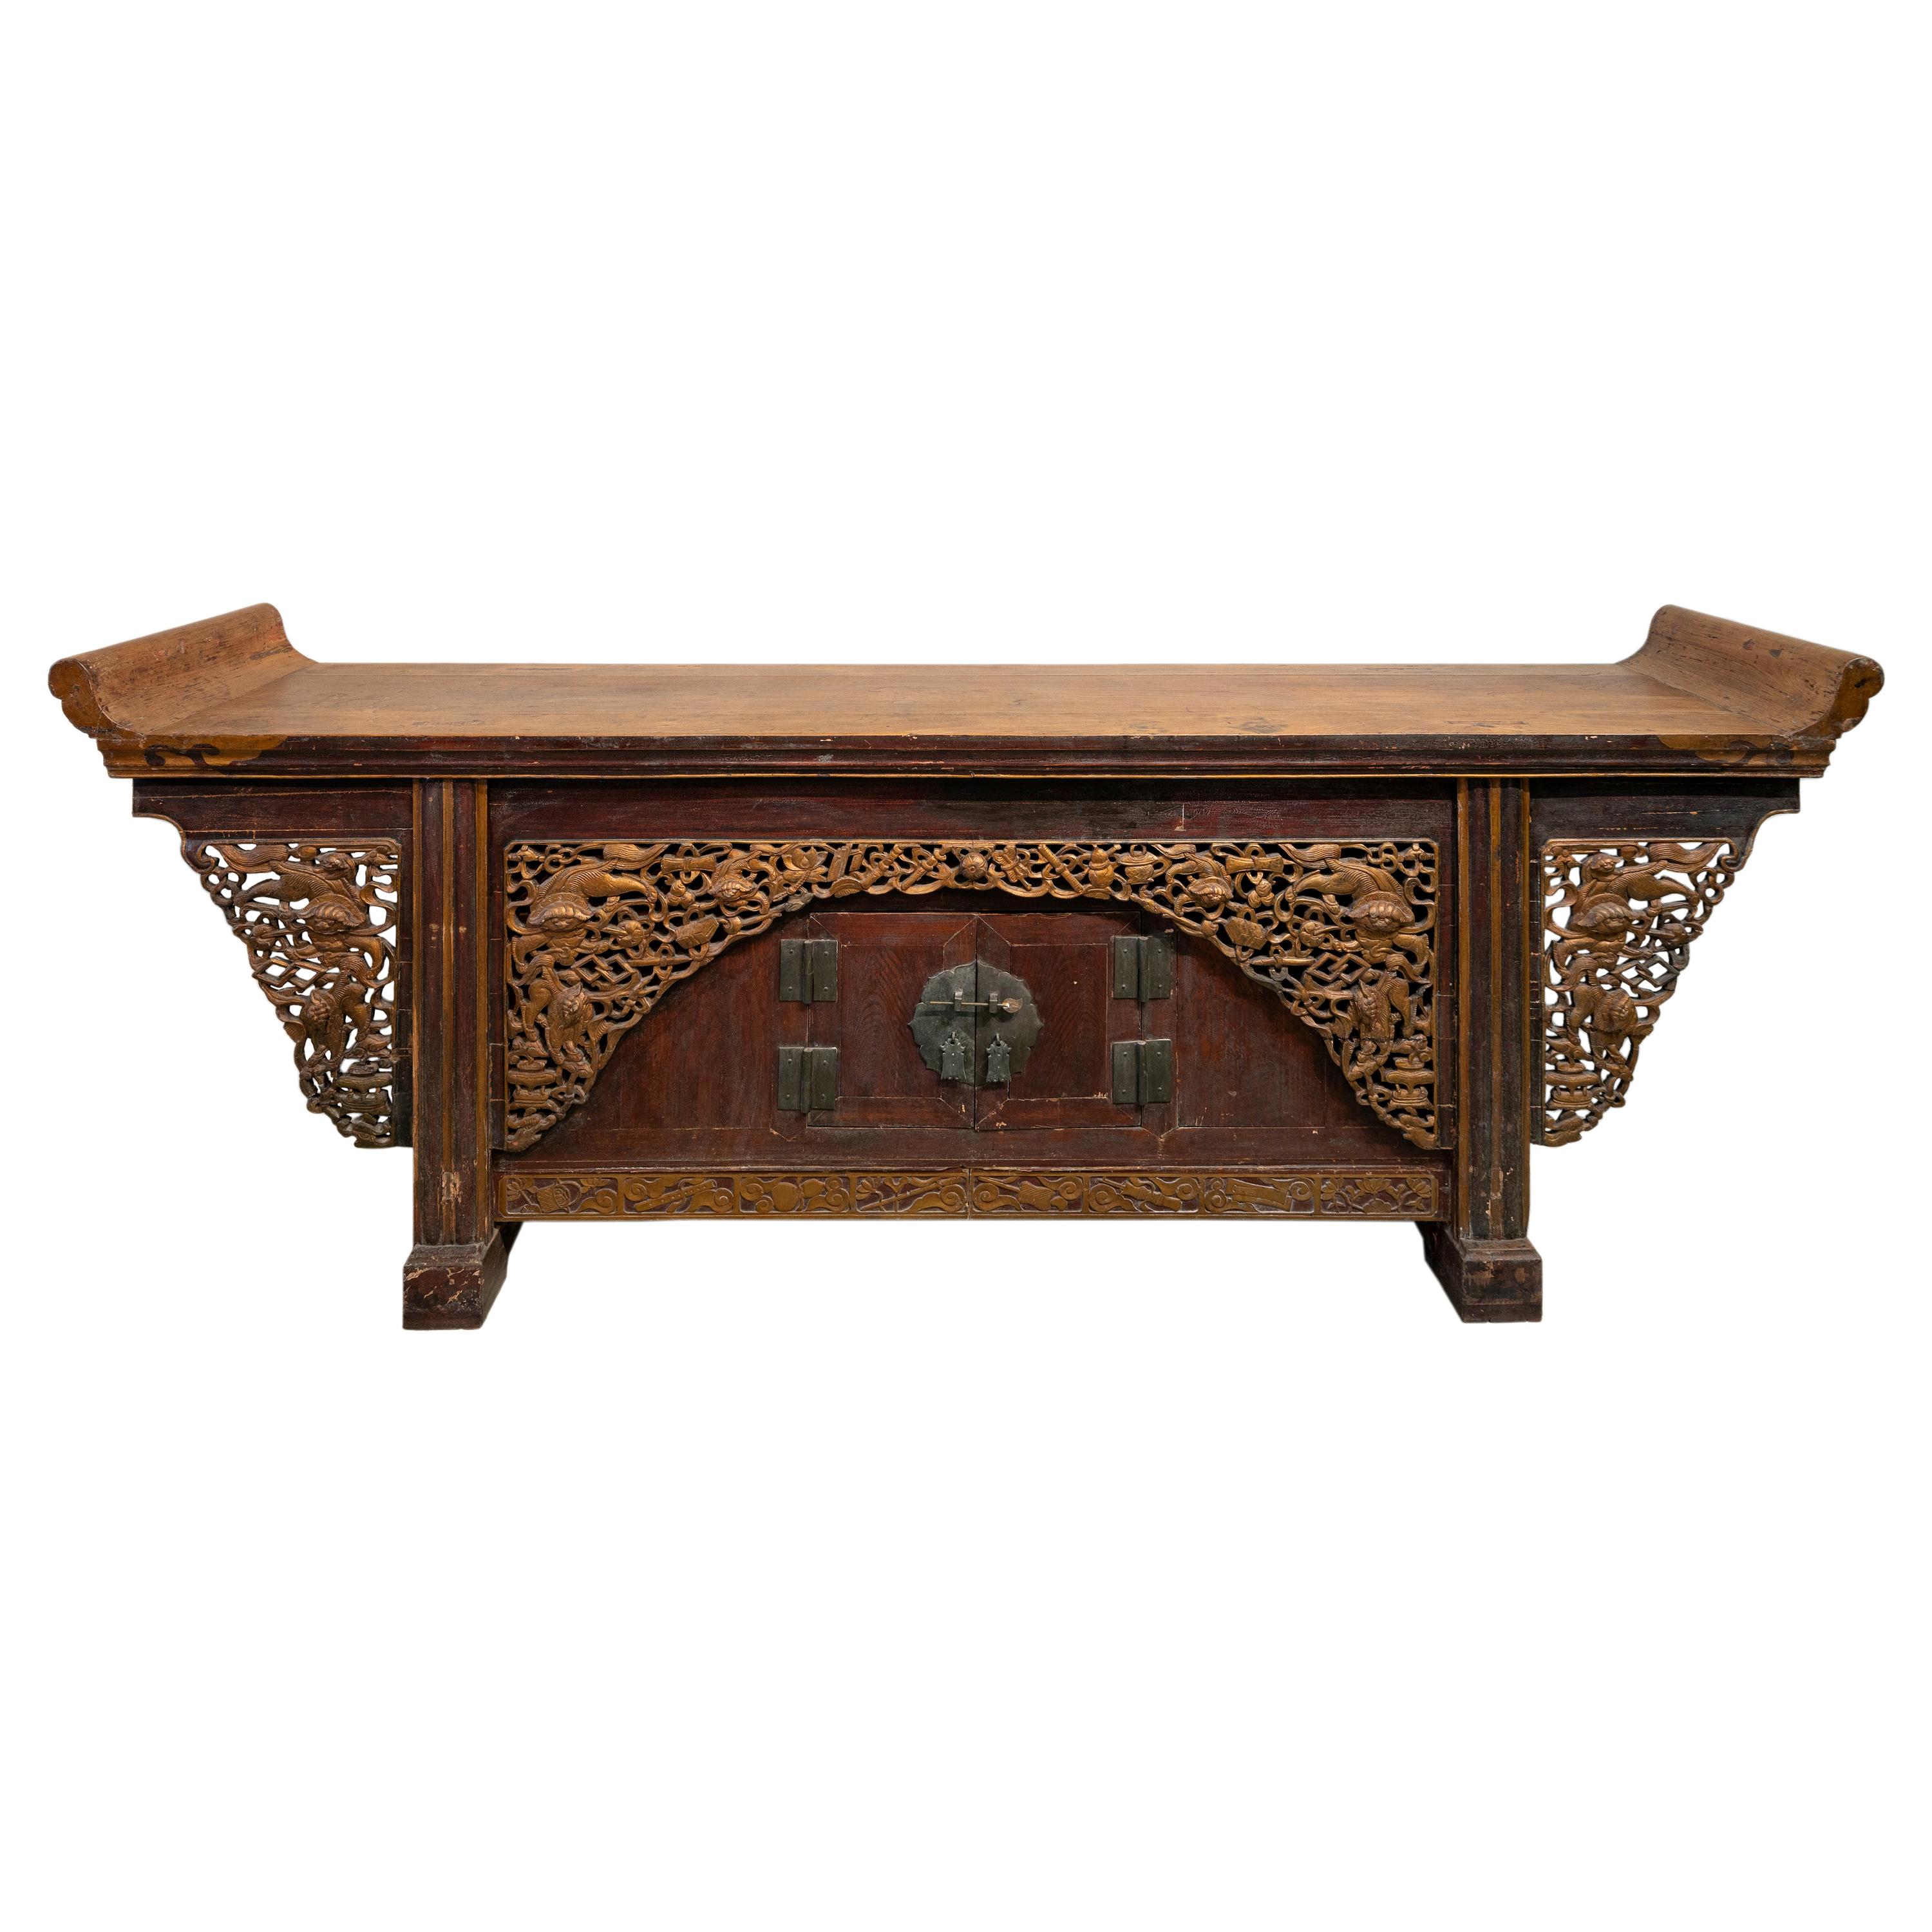 Early 19th Century Chinese Large Sideboard with Everted Ends